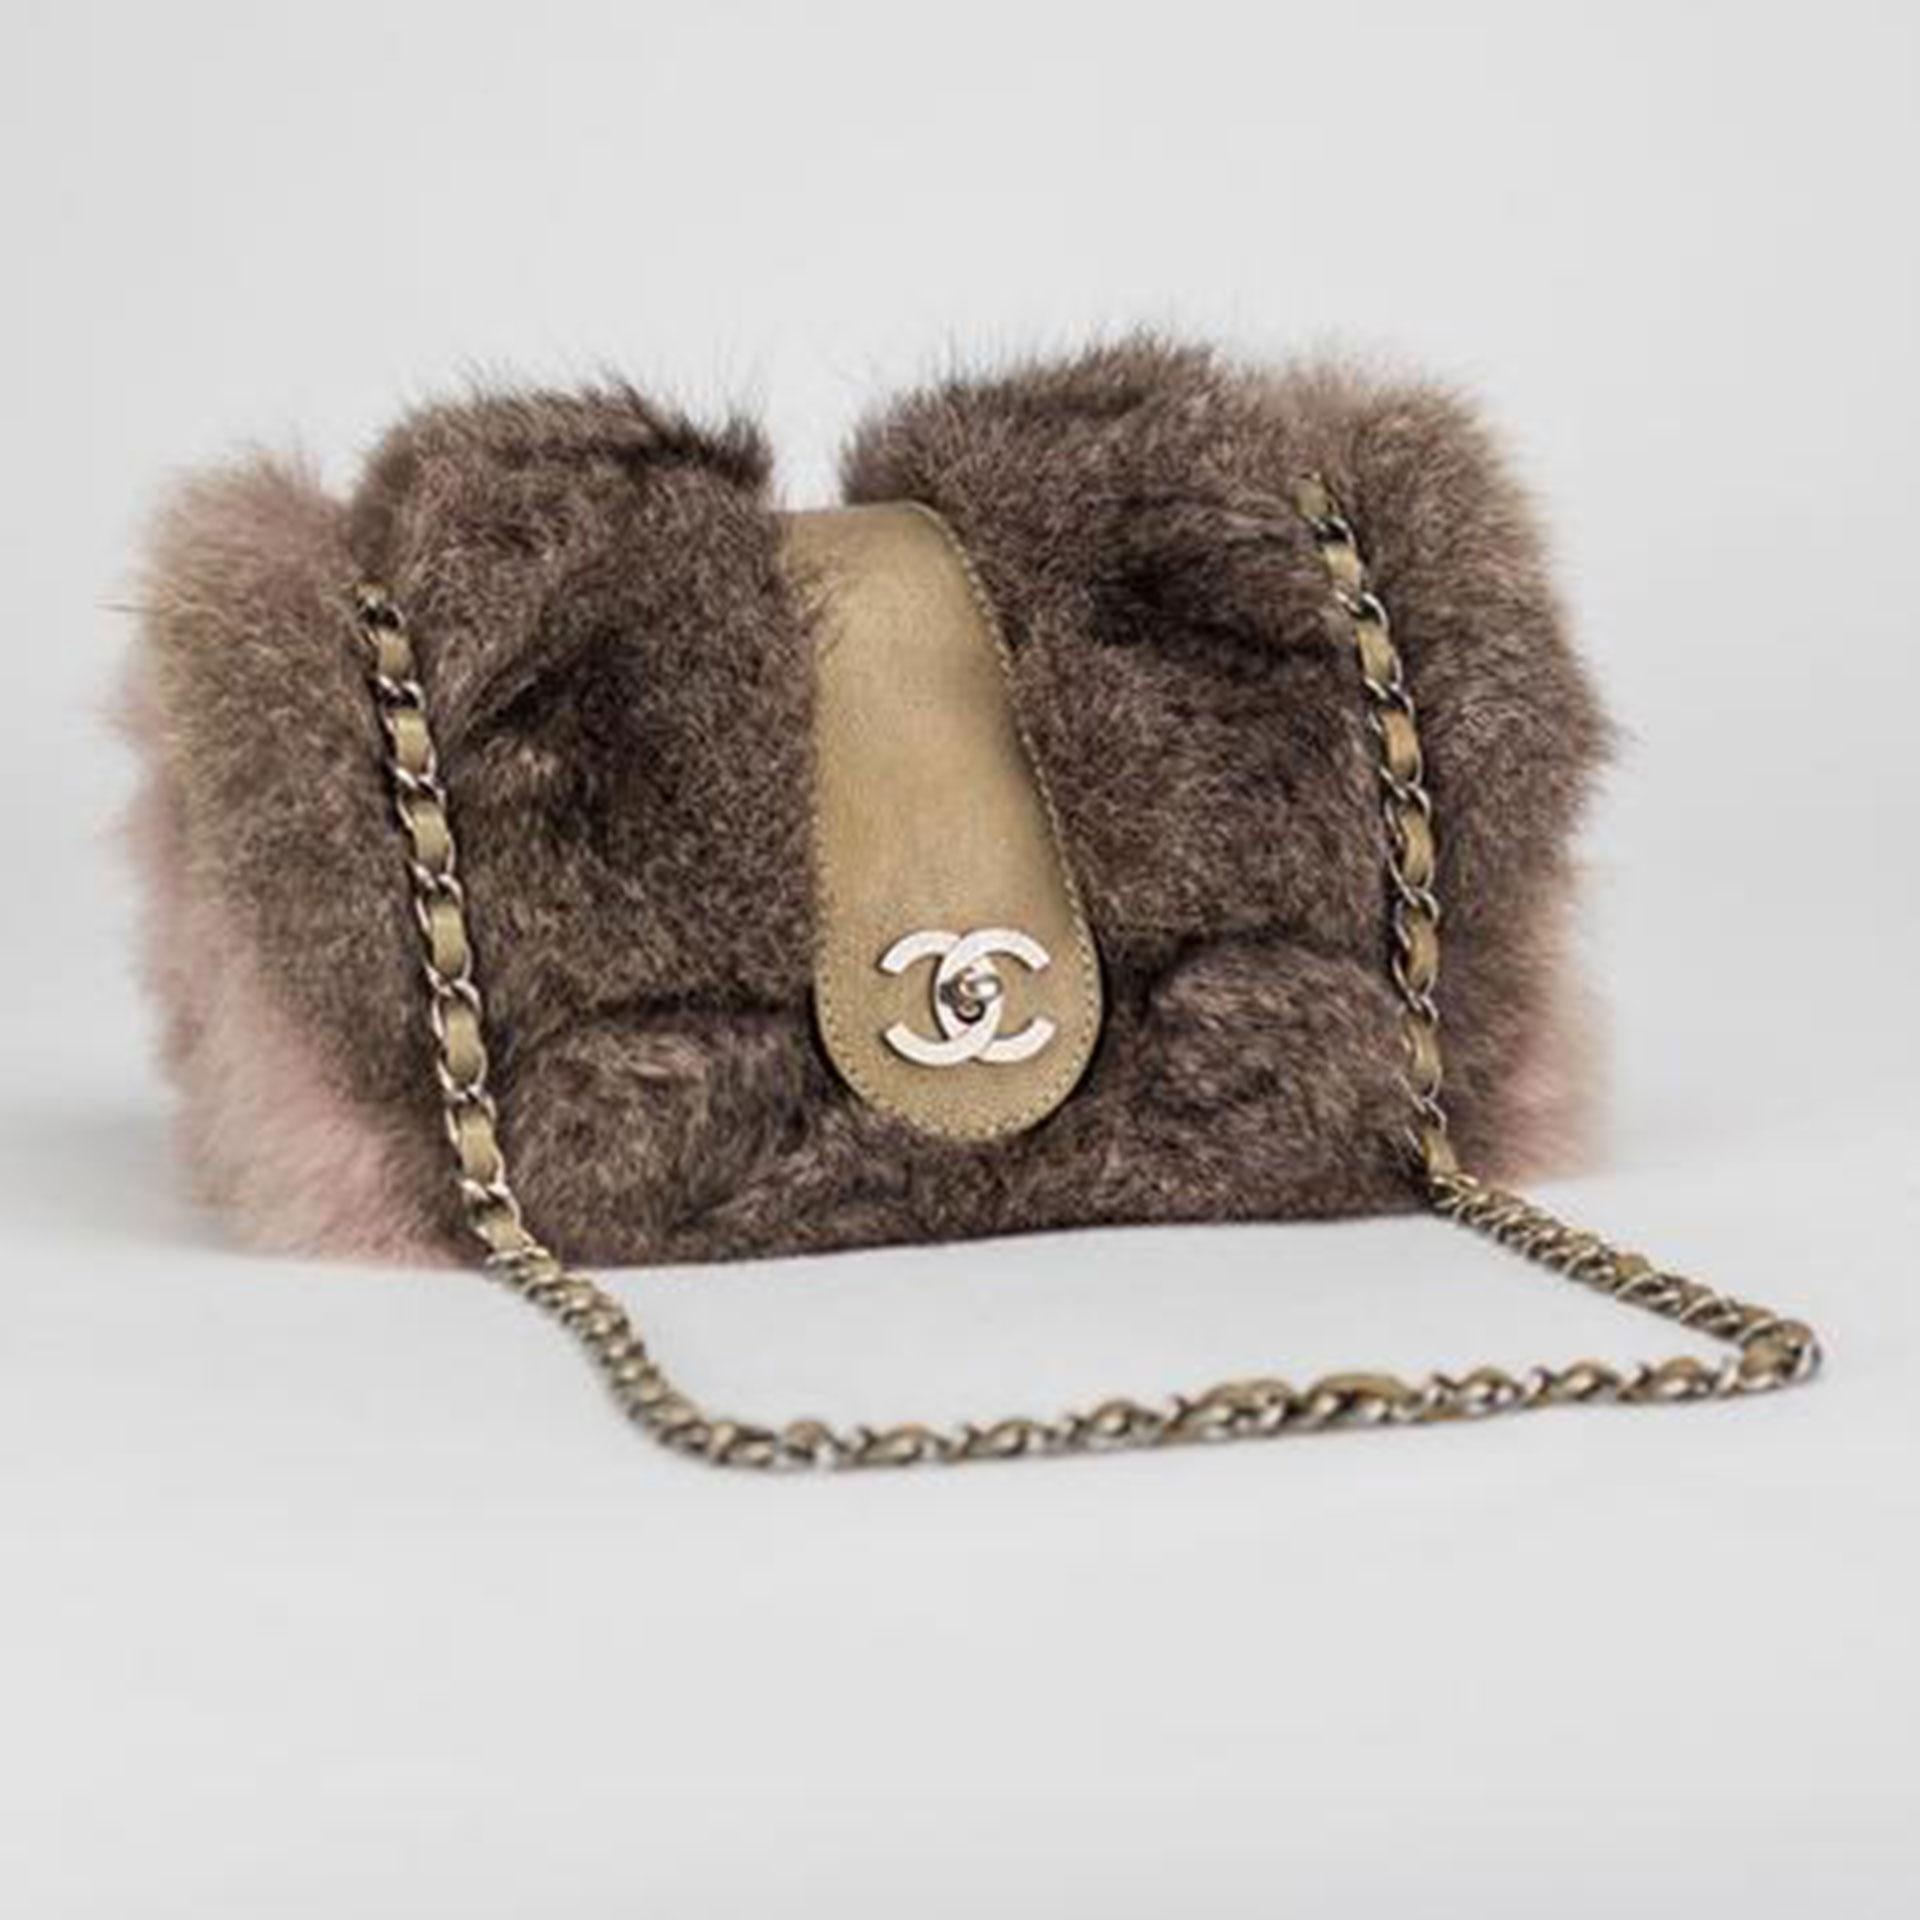 Pink brown Chanel fur with deerskin interior lining and aged silver hardware

2005 {VINTAGE 17 Years}

Interwoven chain

Interior center zipper pocket

Strap drop: Single 16” Double 9”

6” H x 10” W x 4” D

Made in Italy